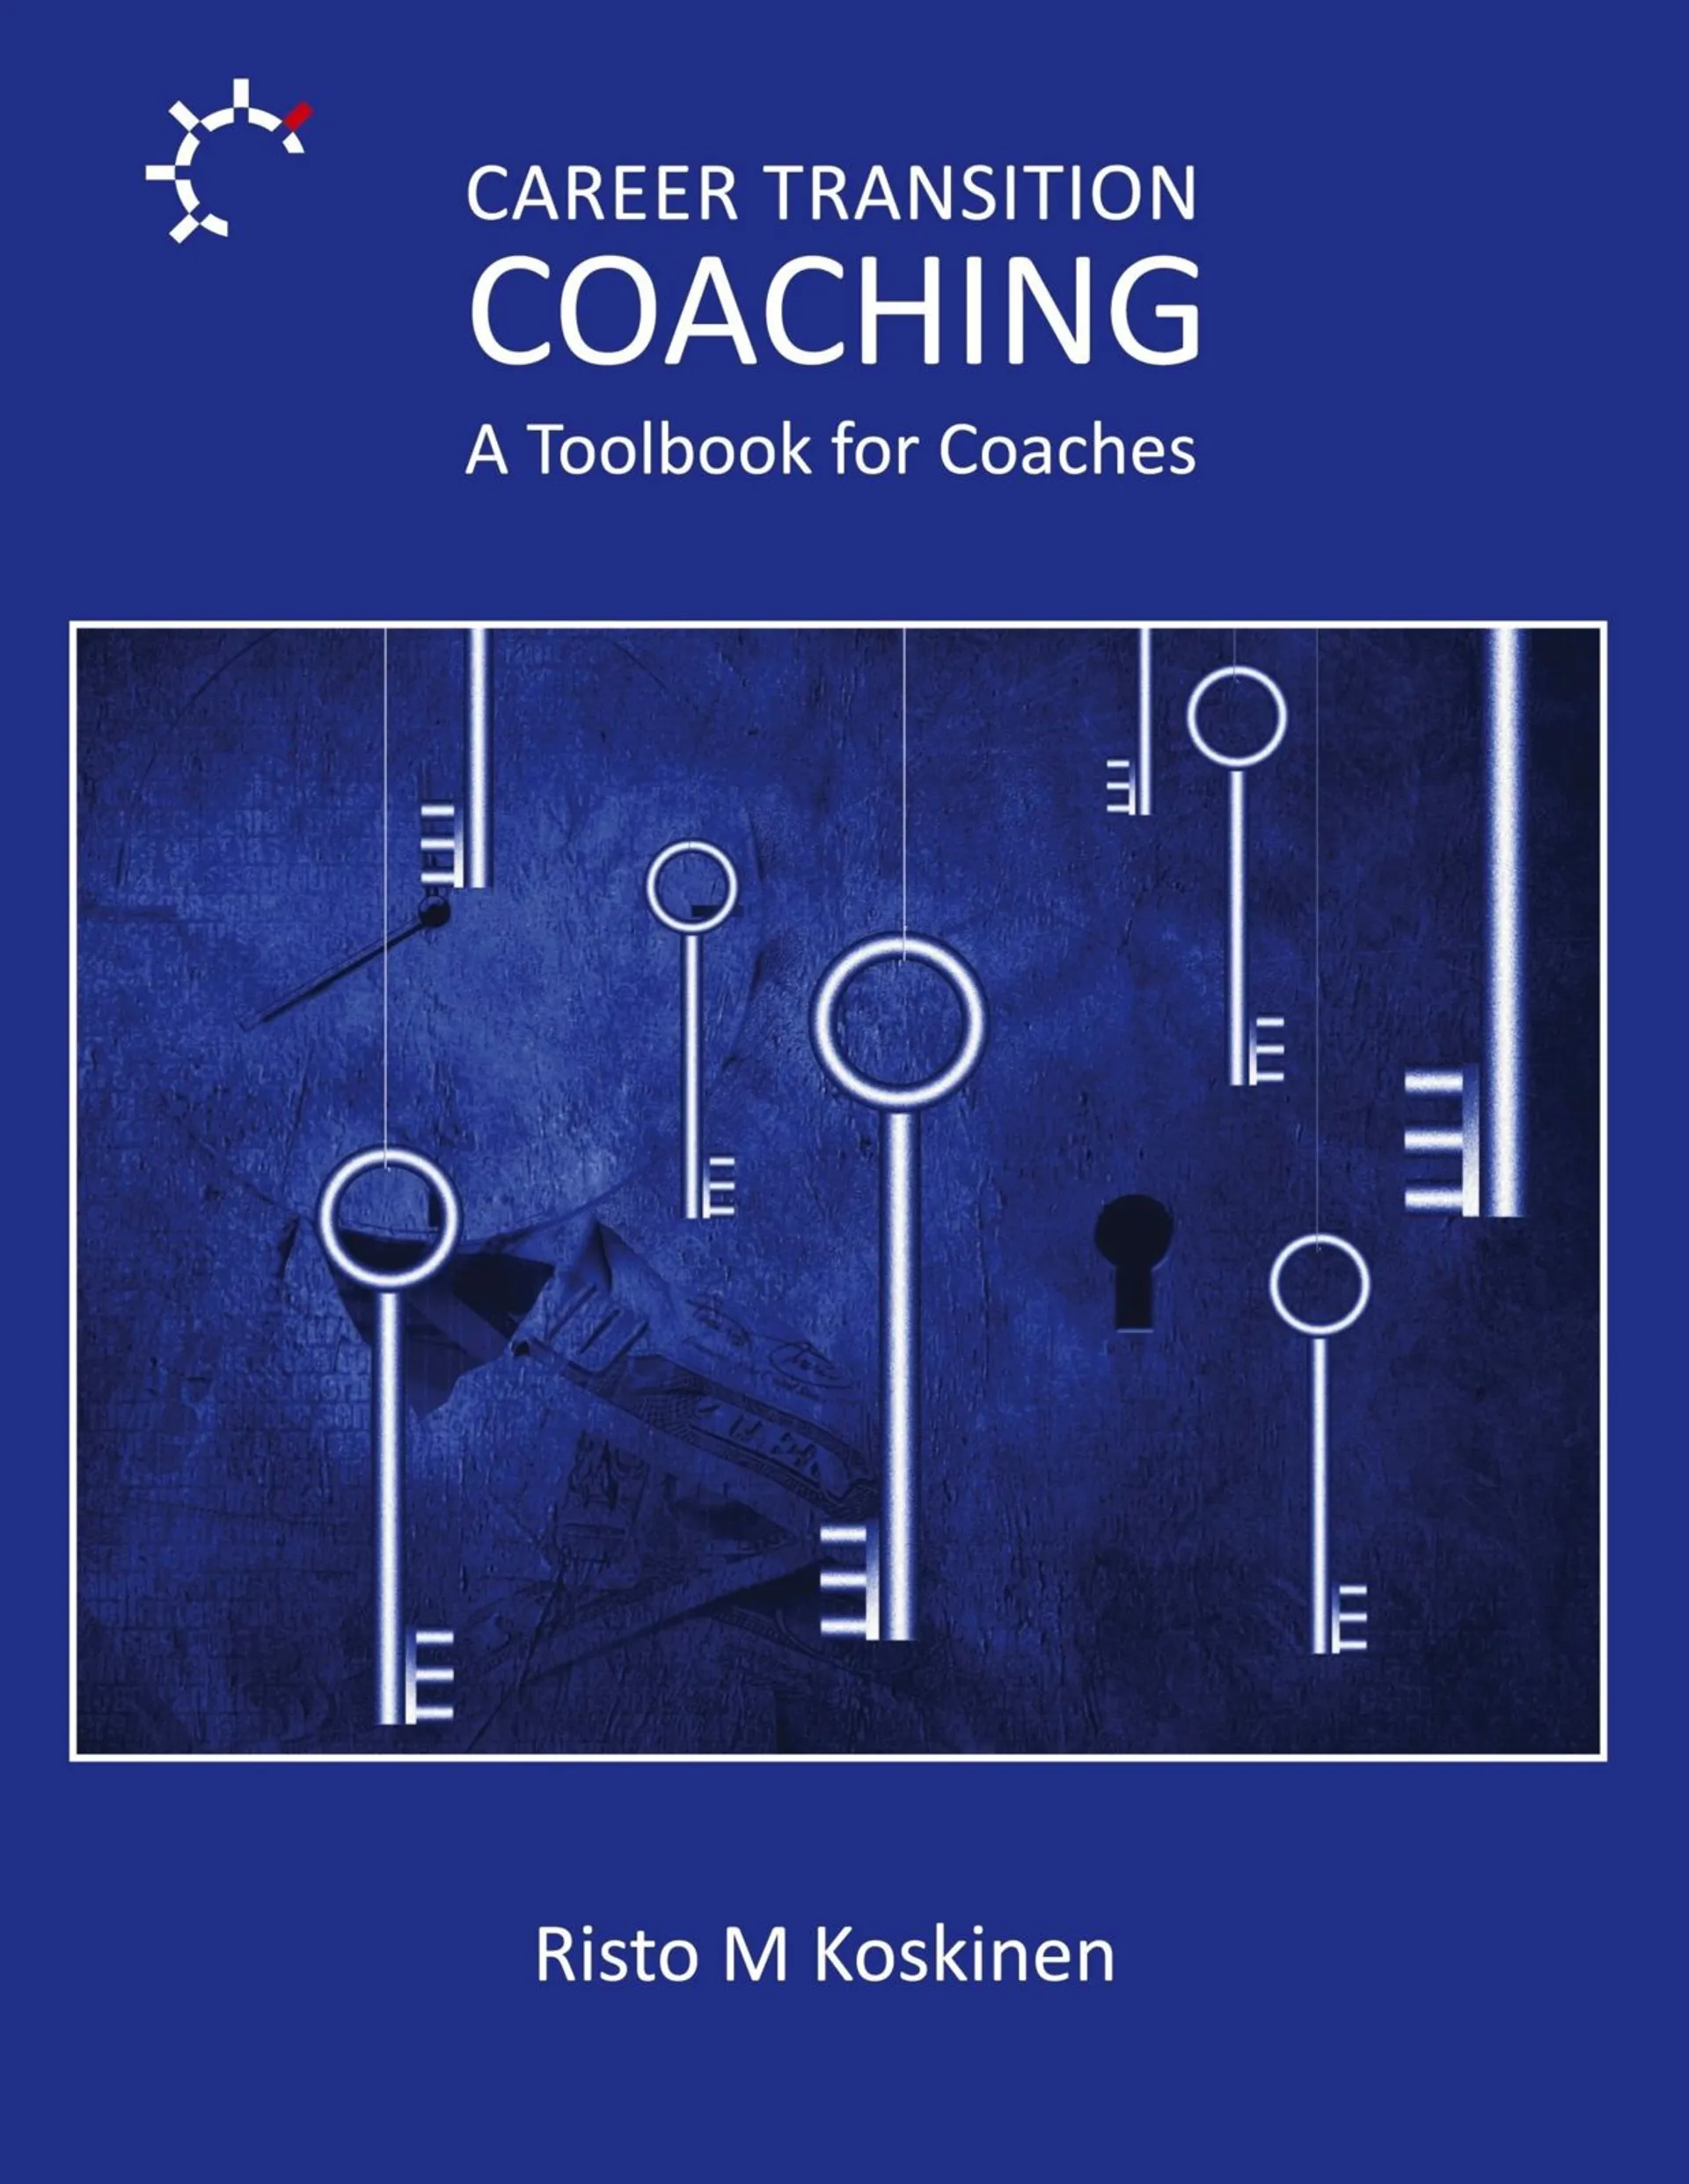 Koskinen, Career Transition Coaching - Toolbook for Coaches